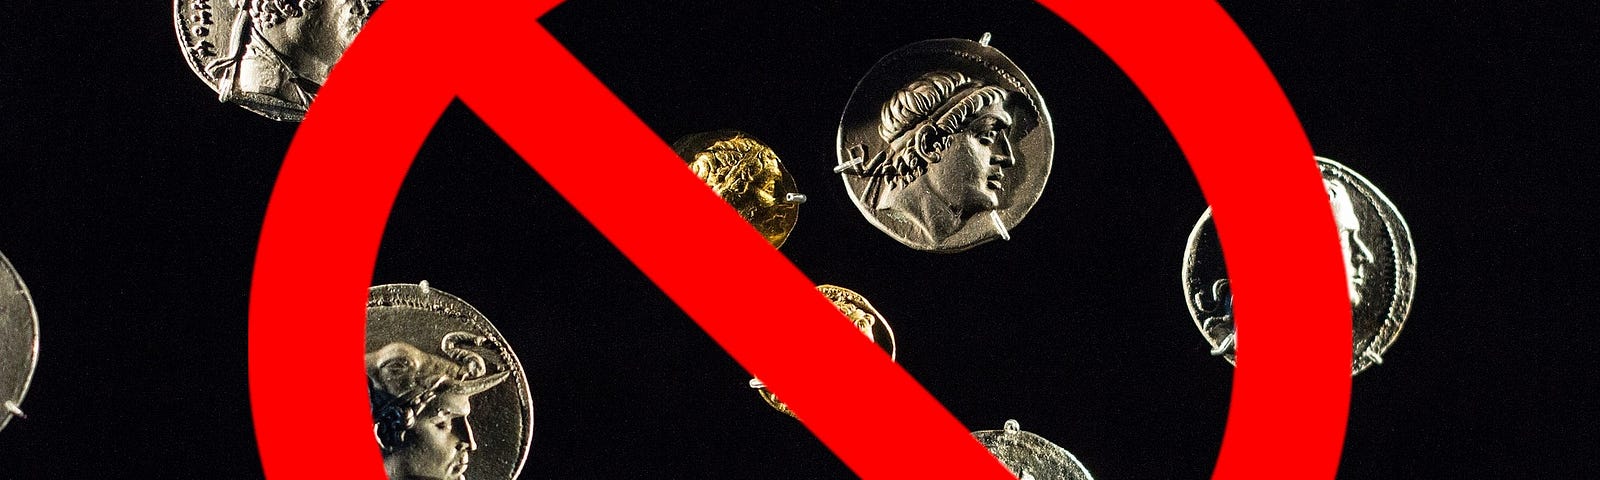 A large ‘No’ or ‘Forbidden’ red symbol superimposed over a variety of ancient coins.